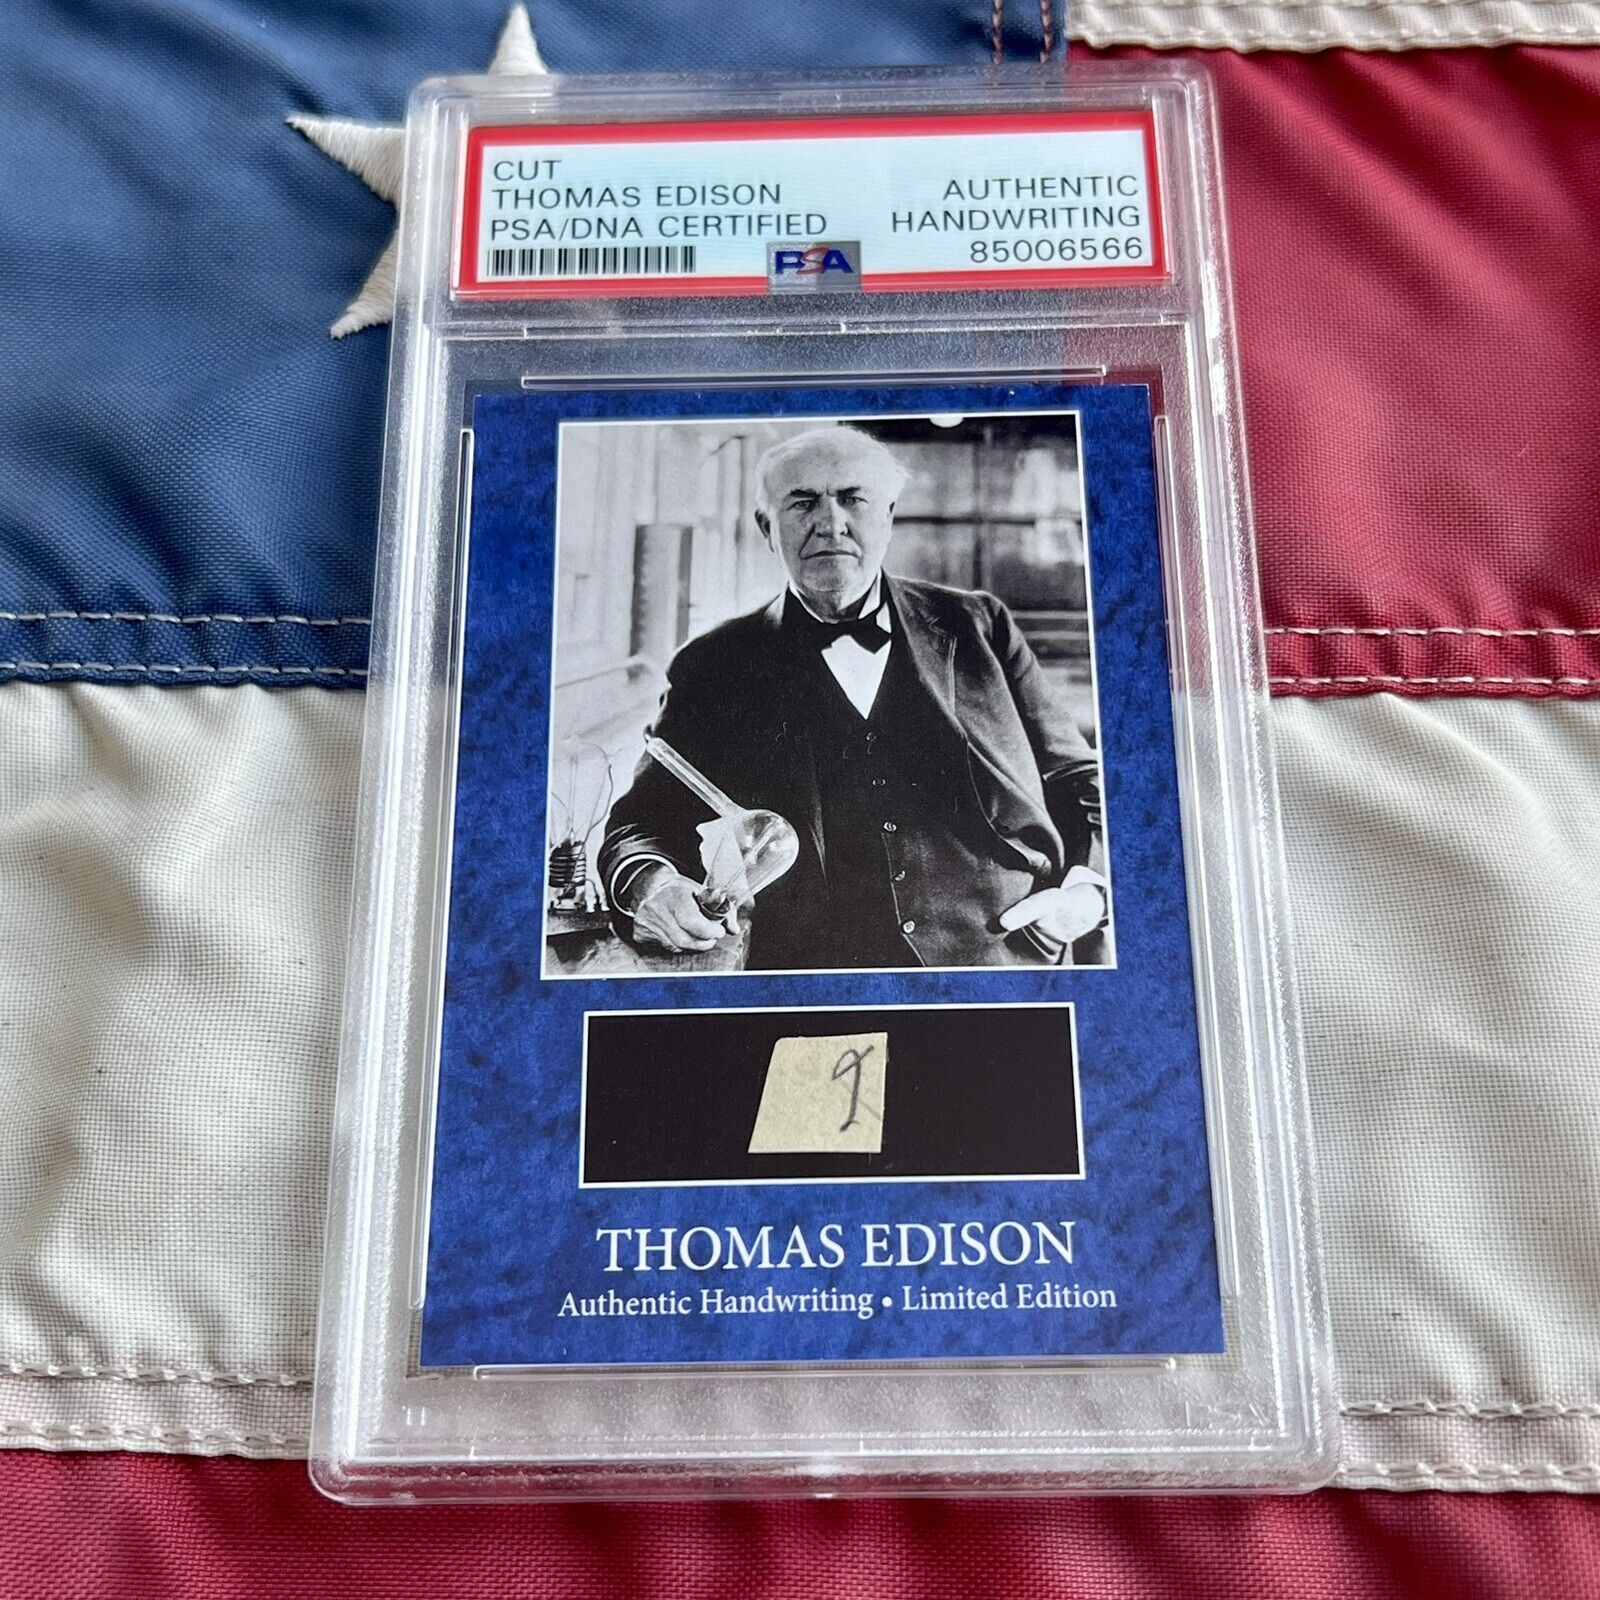 Thomas Edison Cut Handwritten Word Removed From an Autograph Letter Signed PSA